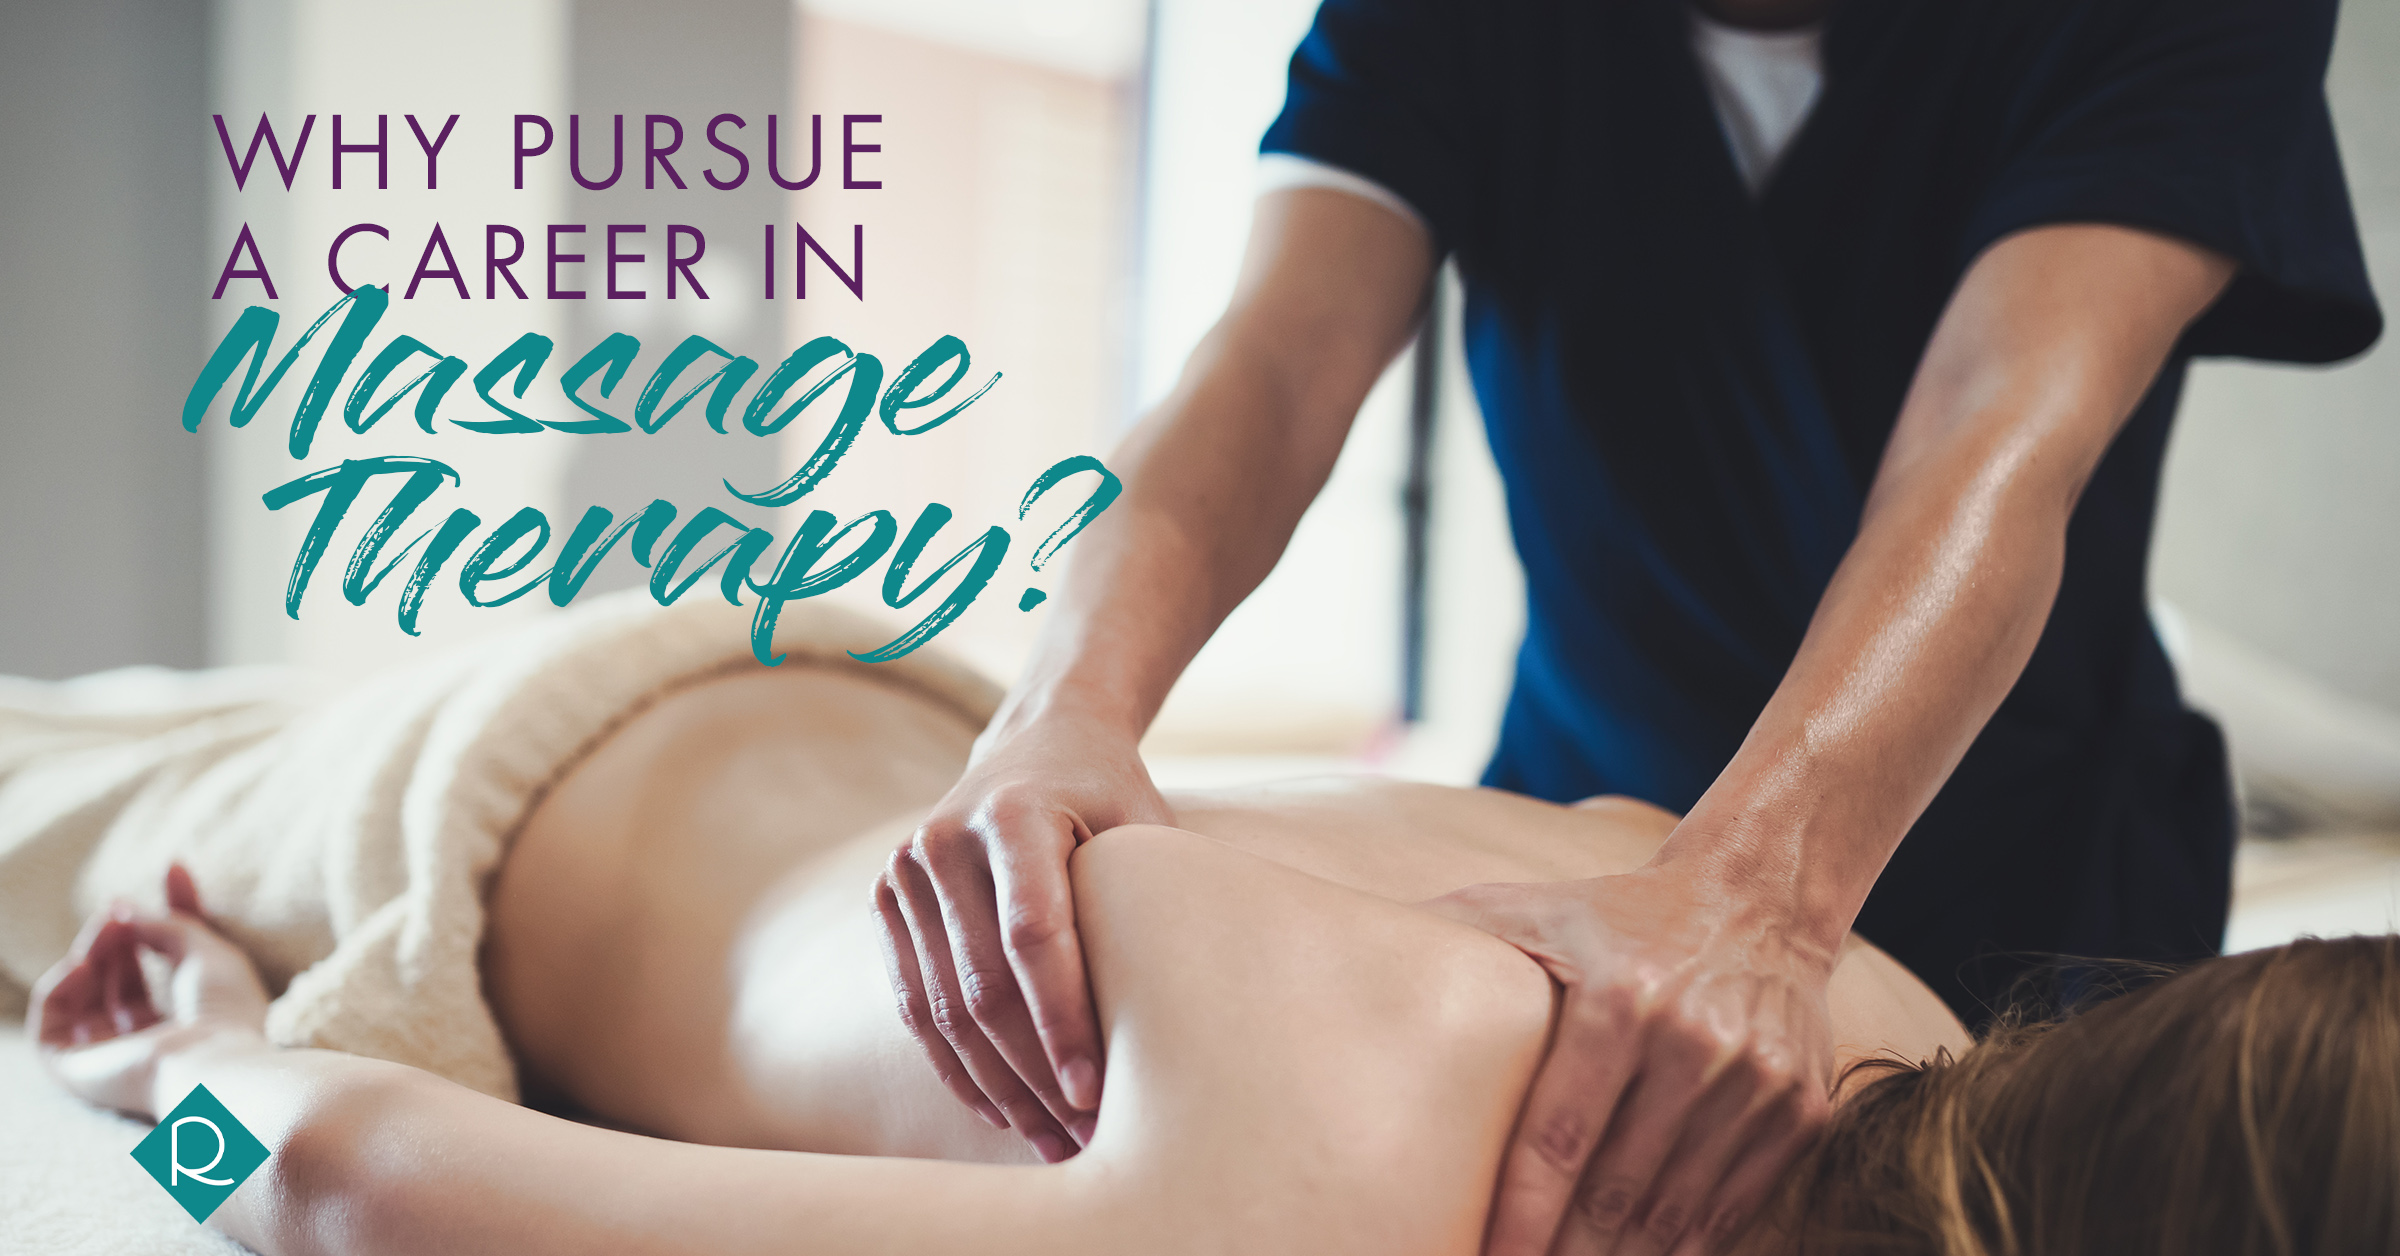 Person giving client a massage with the text "Why pursue a career in massage therapy?"